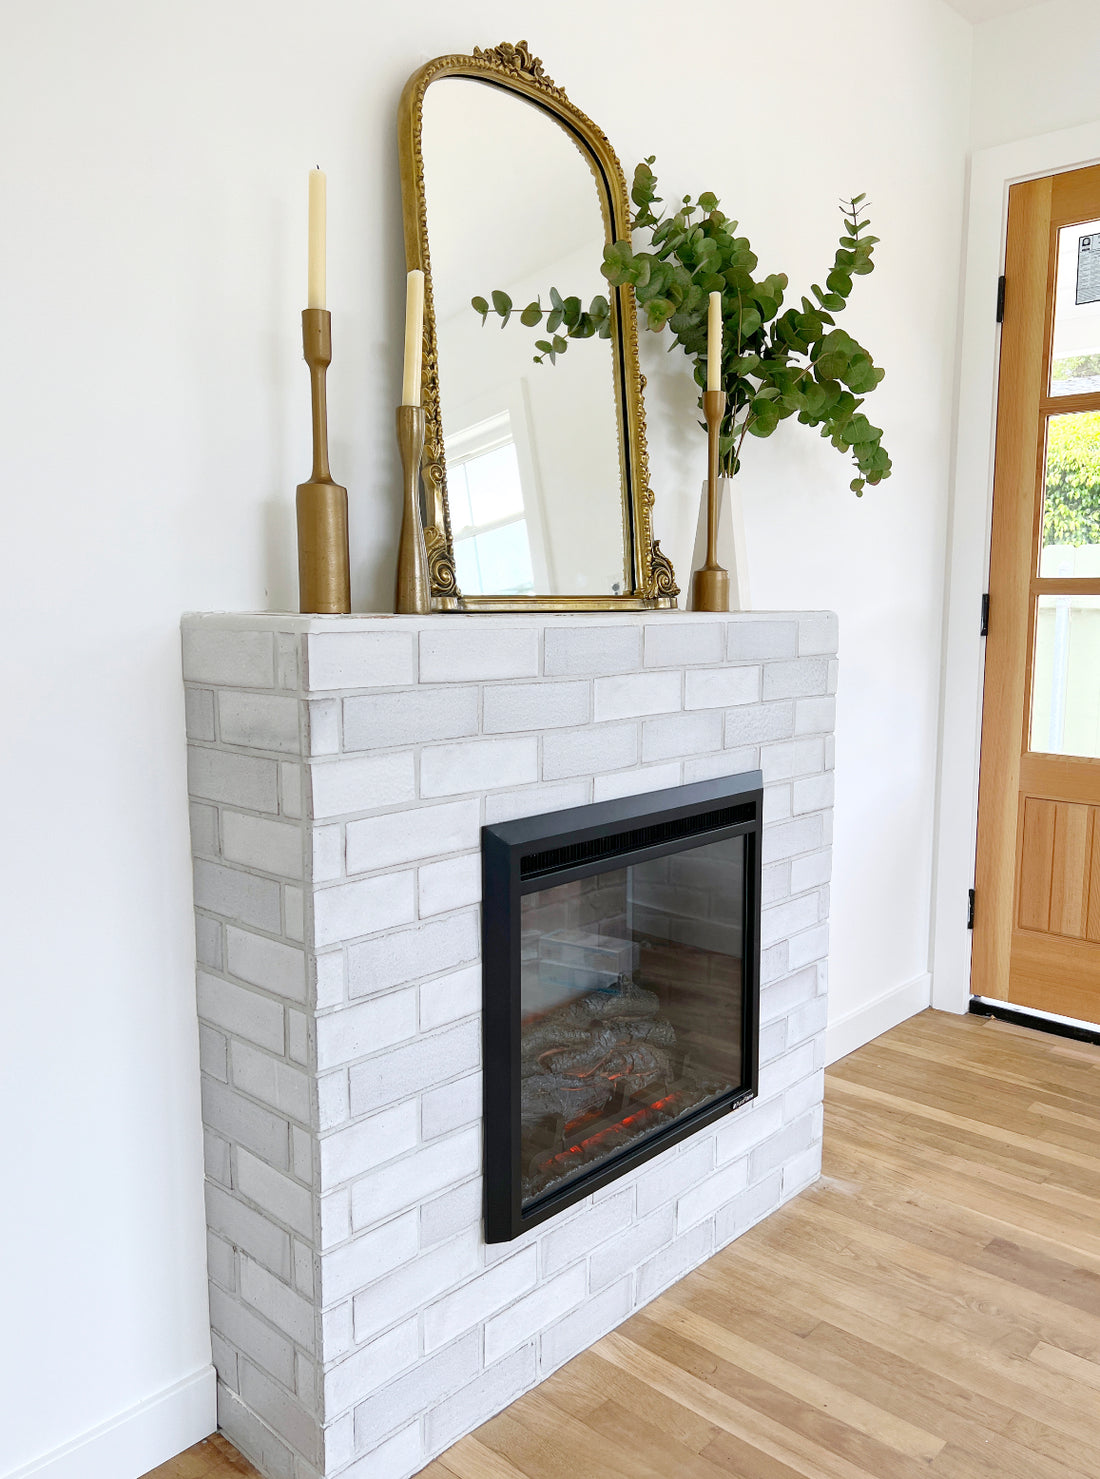 DIY Guide to Building an Electric Fireplace for Small Spaces